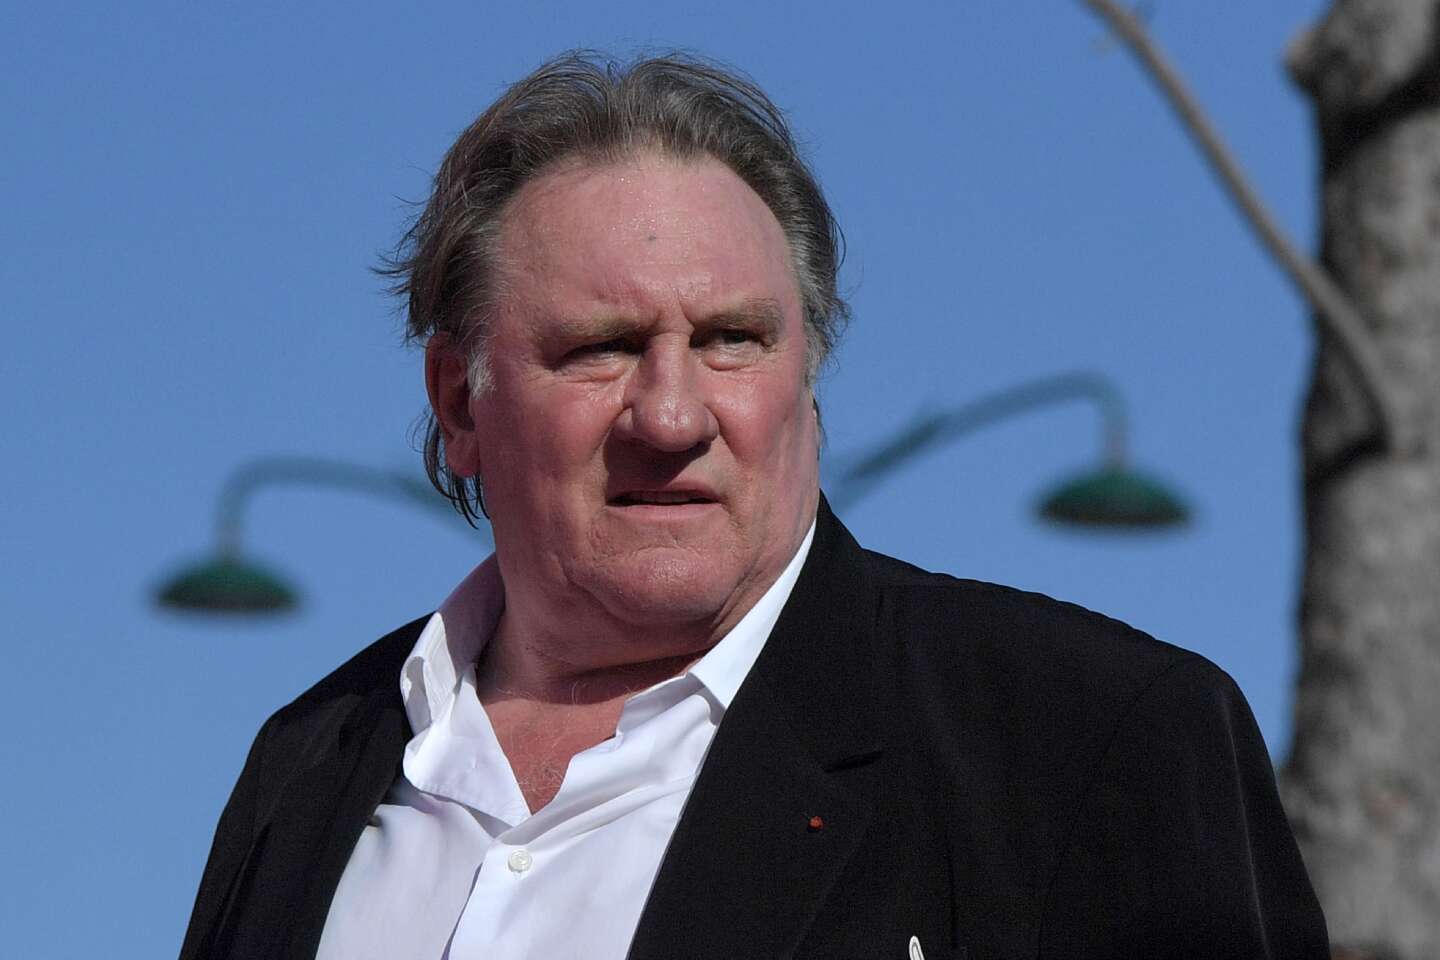 Gérard Depardieu: Swiss public television removes the actor from its programming when he plays “one of the main roles”